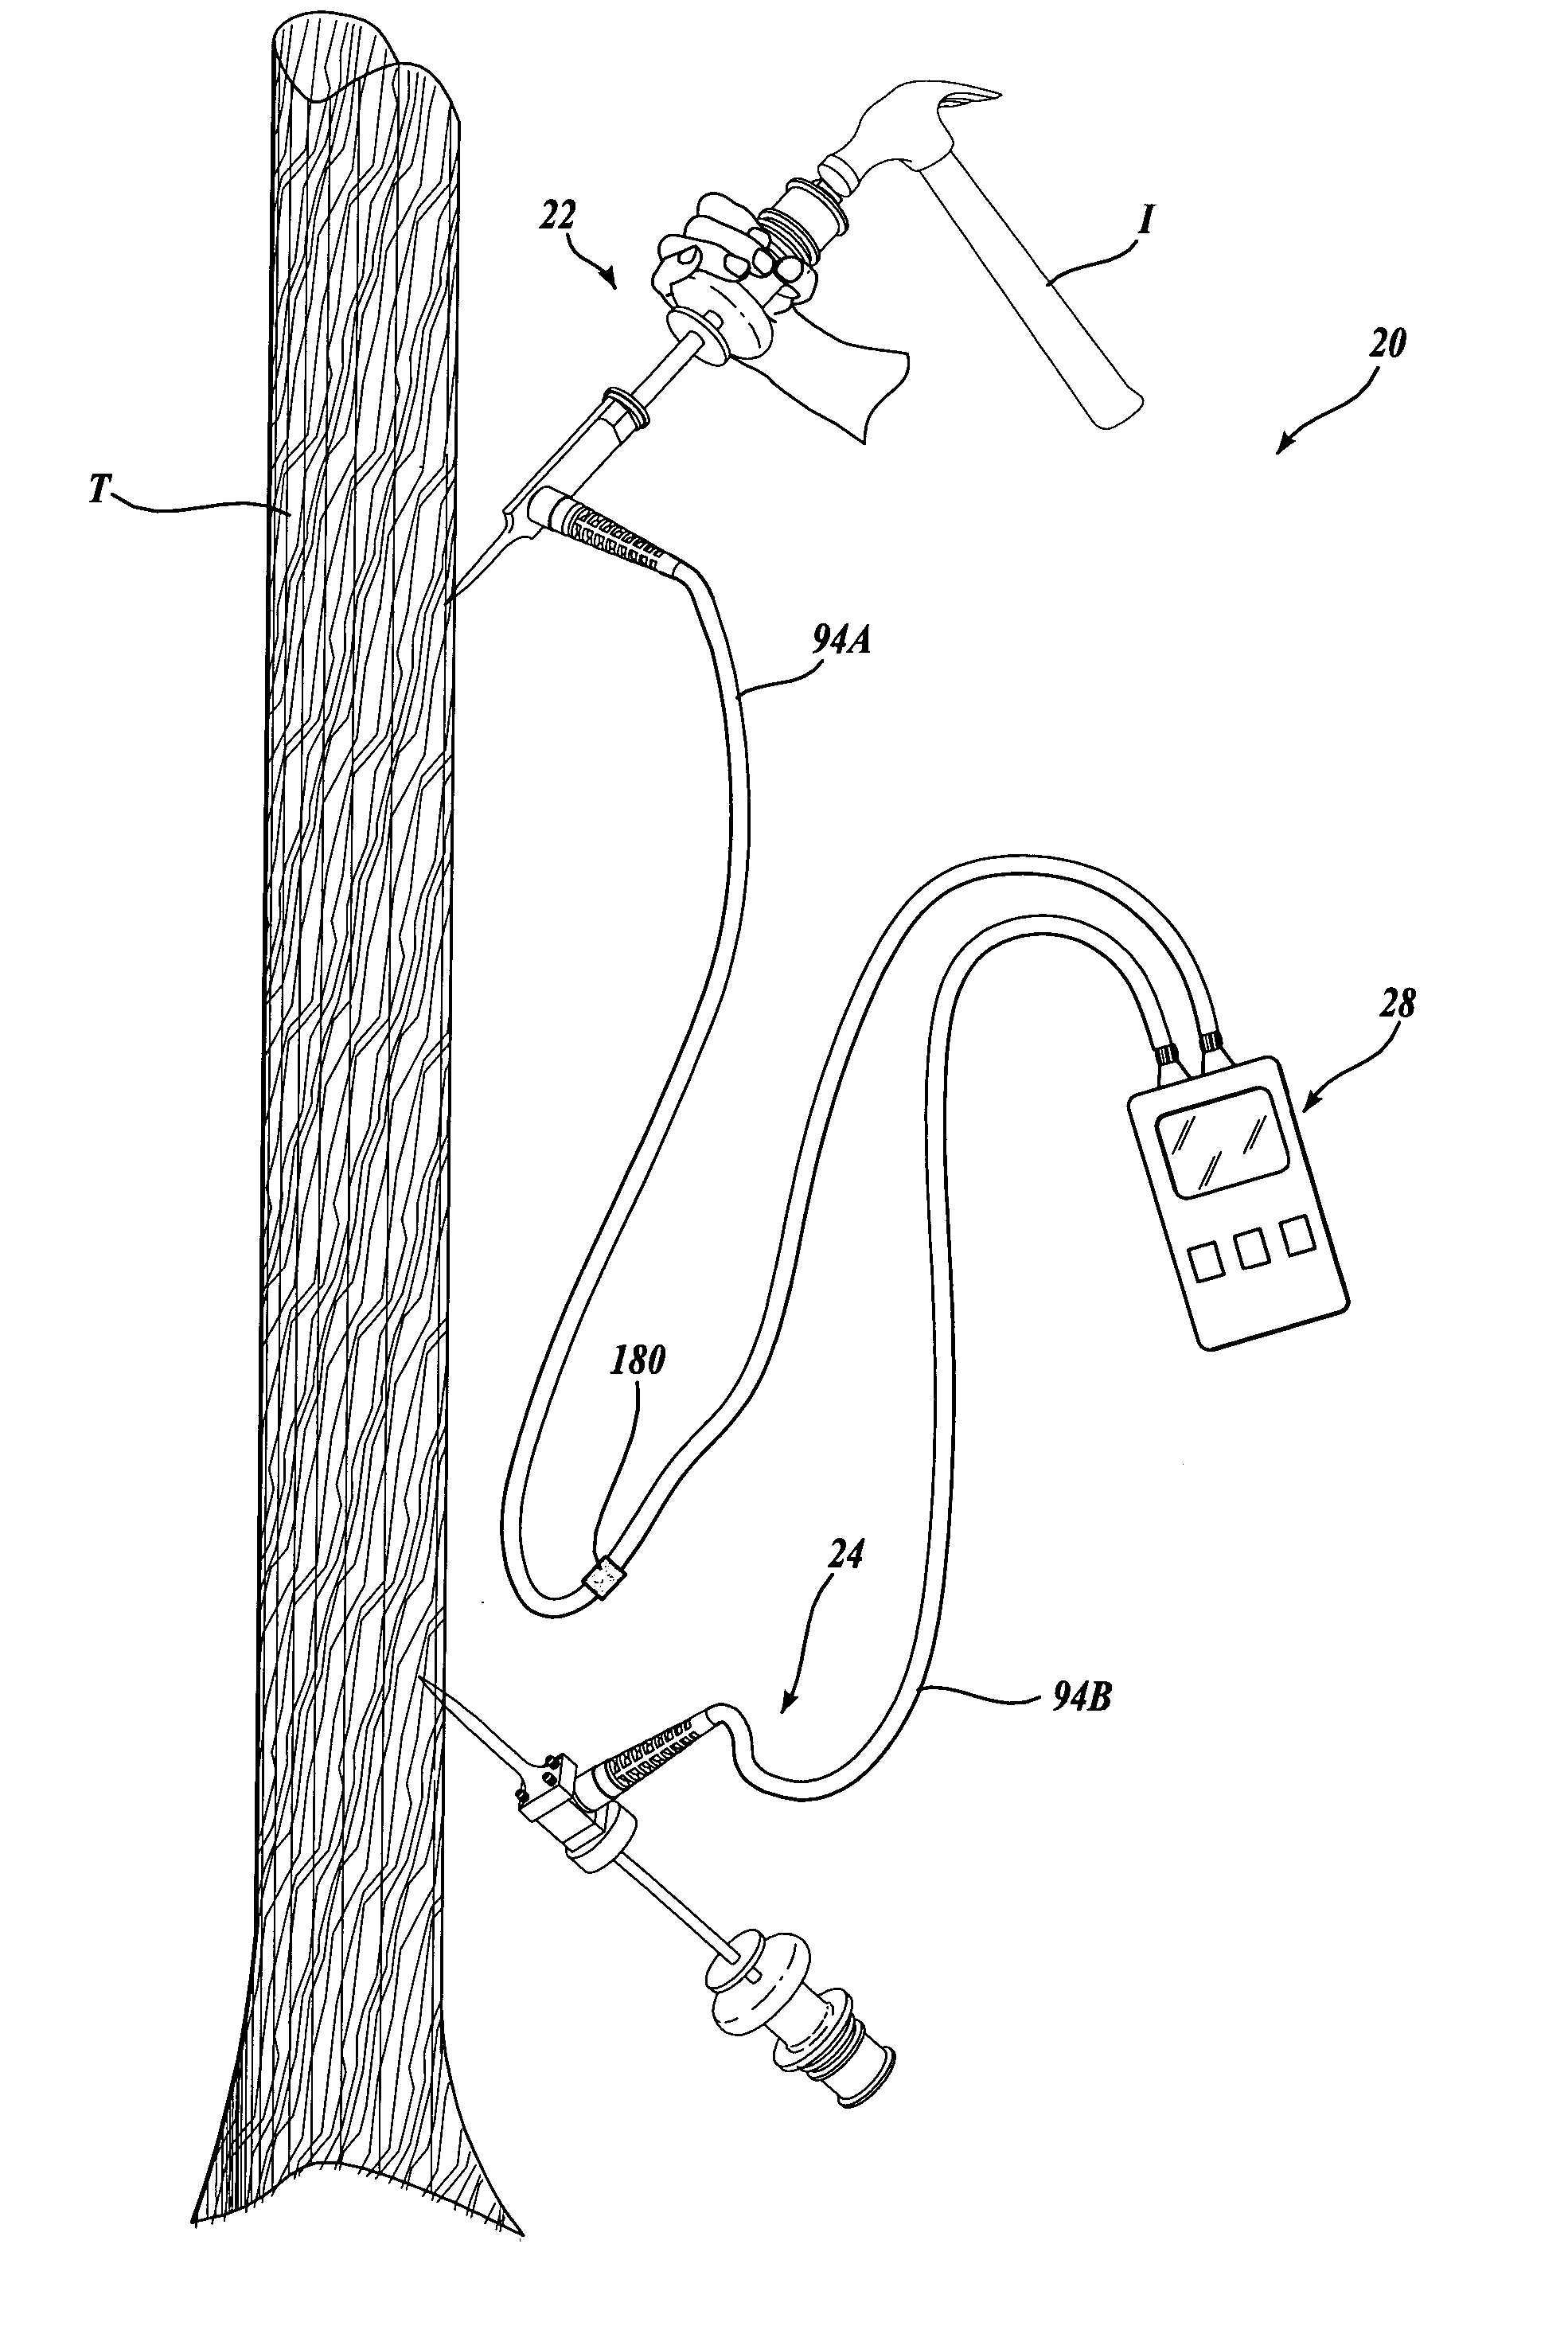 System and method for measuring stiffness in standing trees